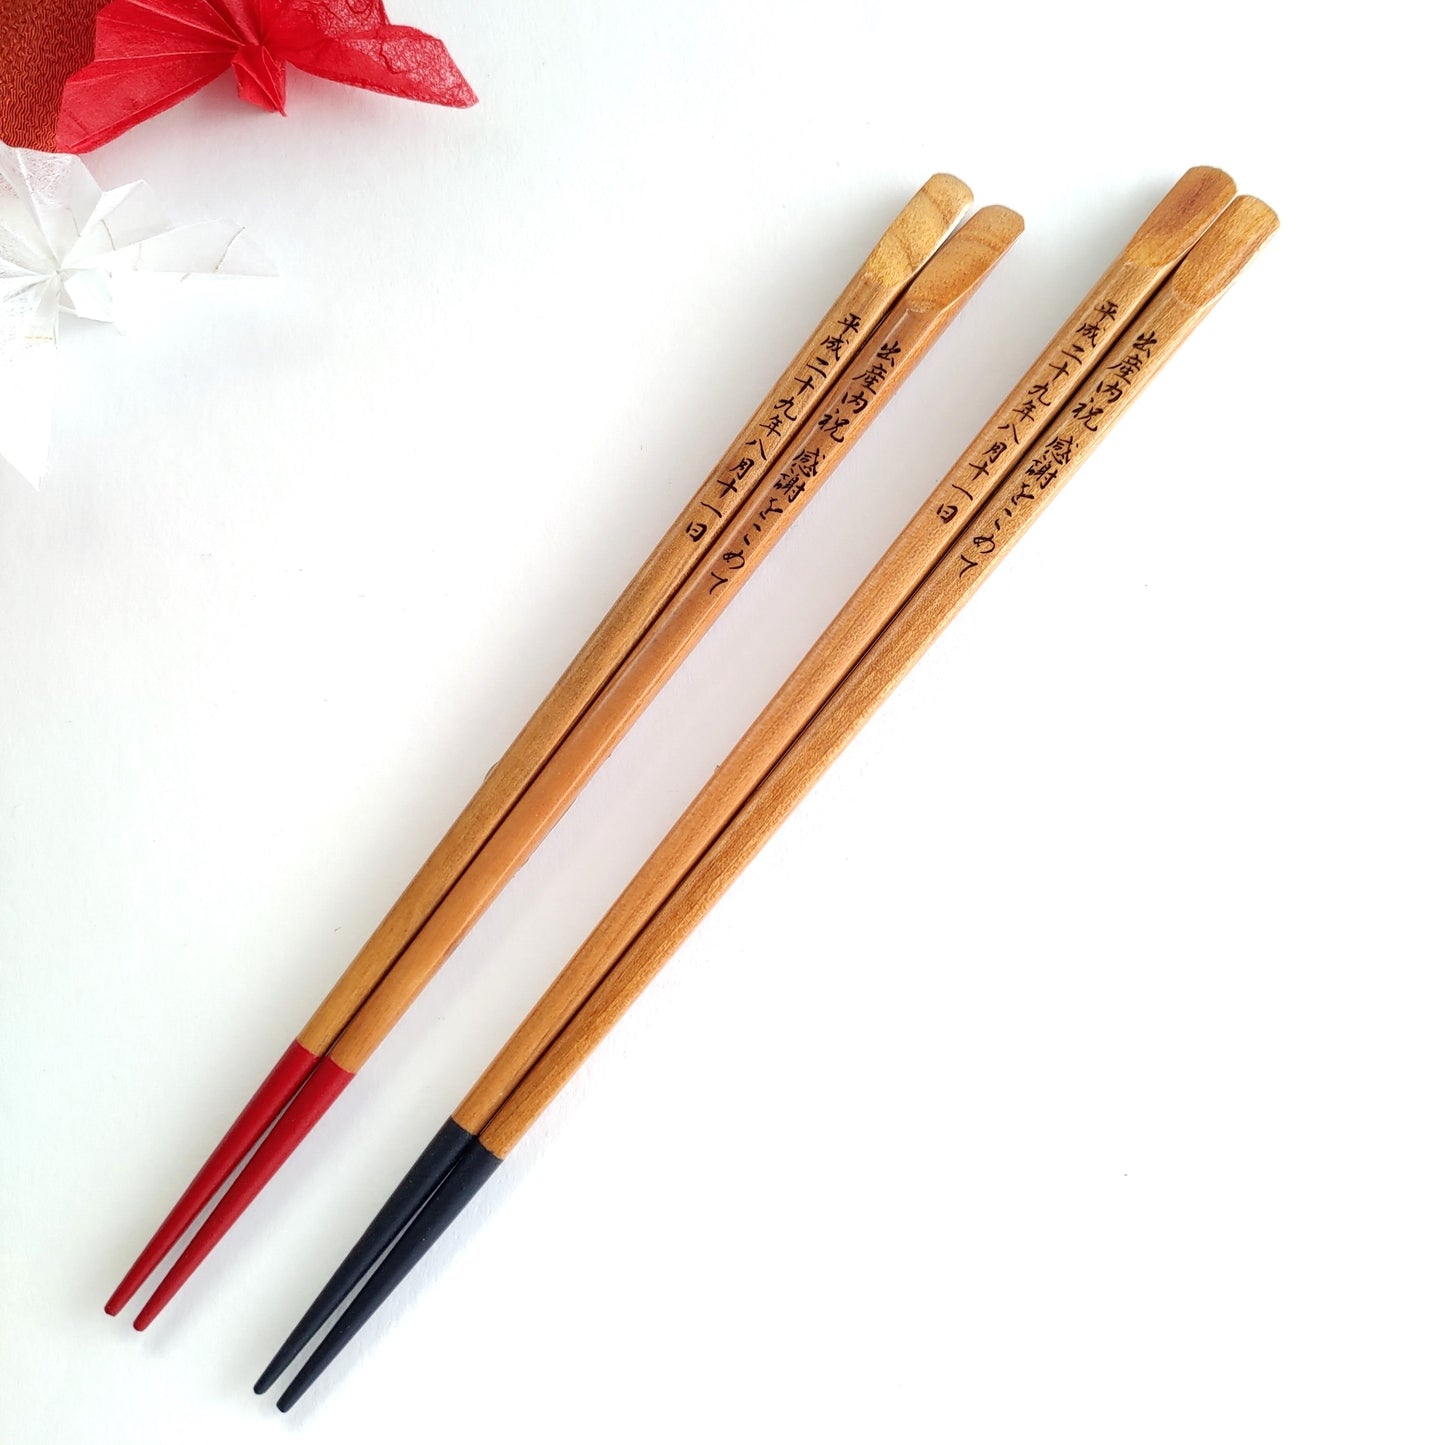 Wood and mountains solid Japanese chopsticks natural - DOUBLE PAIR